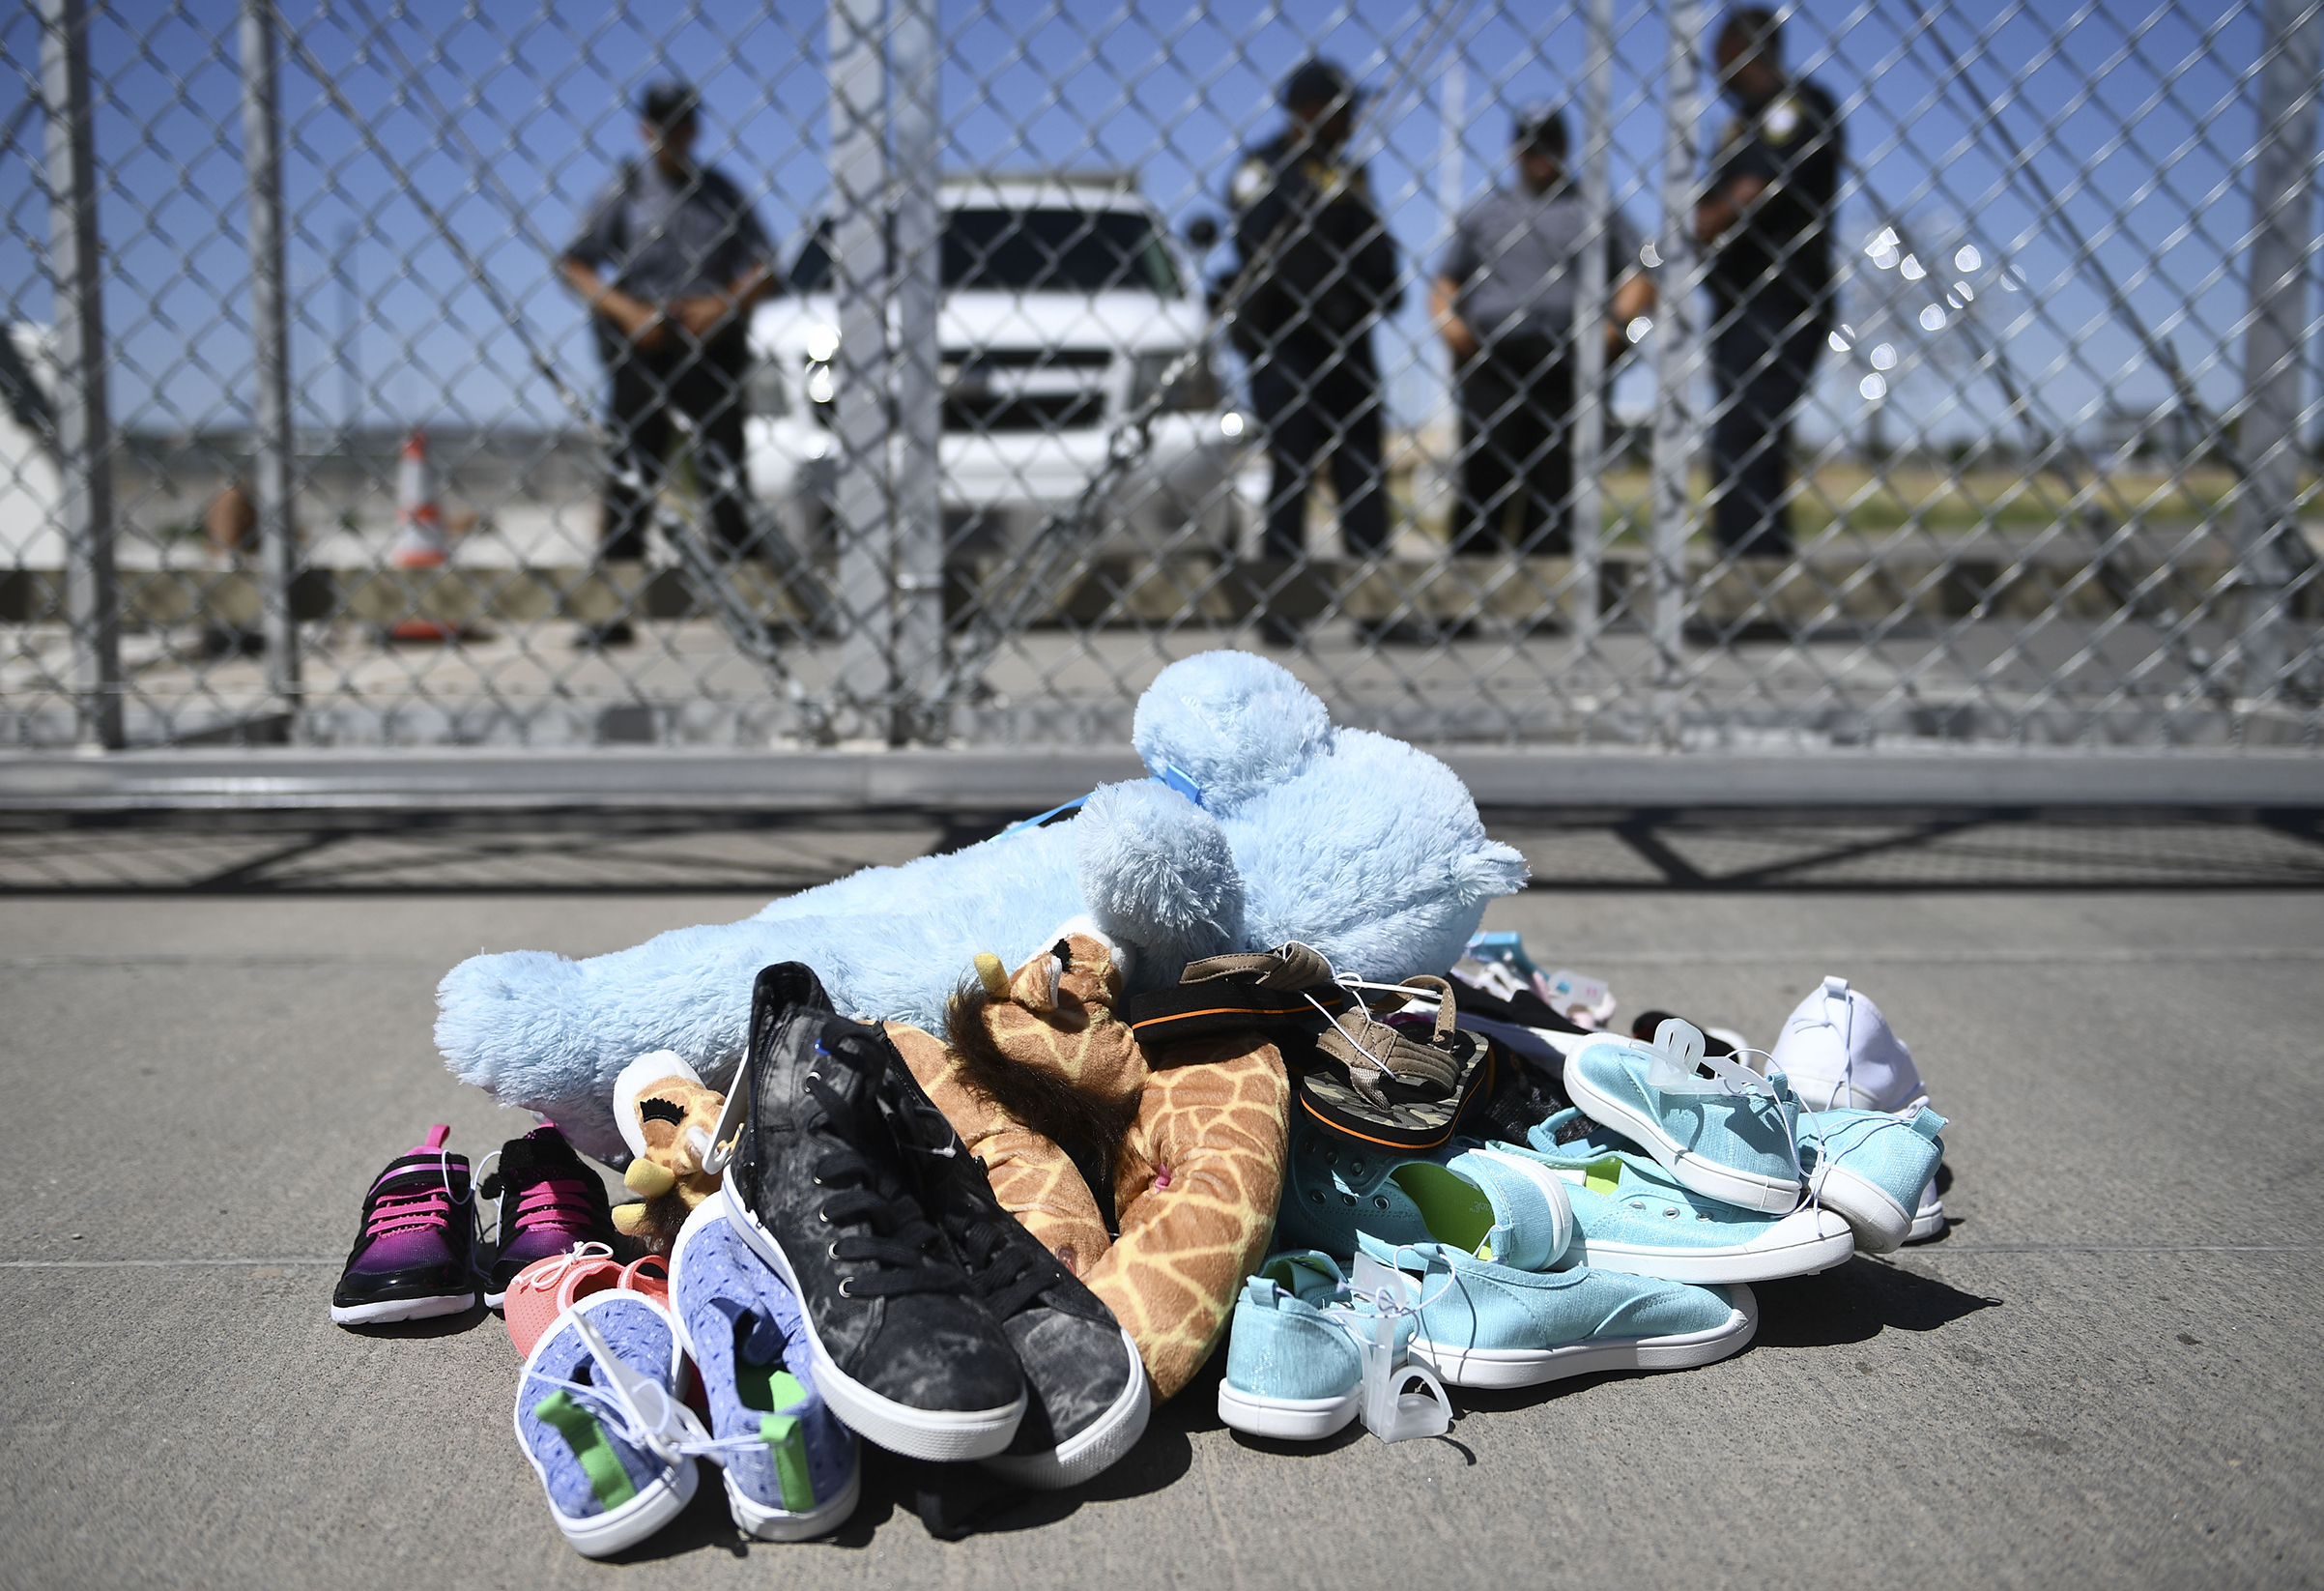 Shoes are left by people at the Tornillo Port of Entry near El Paso, Texas, on June 21, 2018 during a protest rally by several American mayors against the US administration's family separation policy. (Brendan Smialoski—AFP/Getty Images)